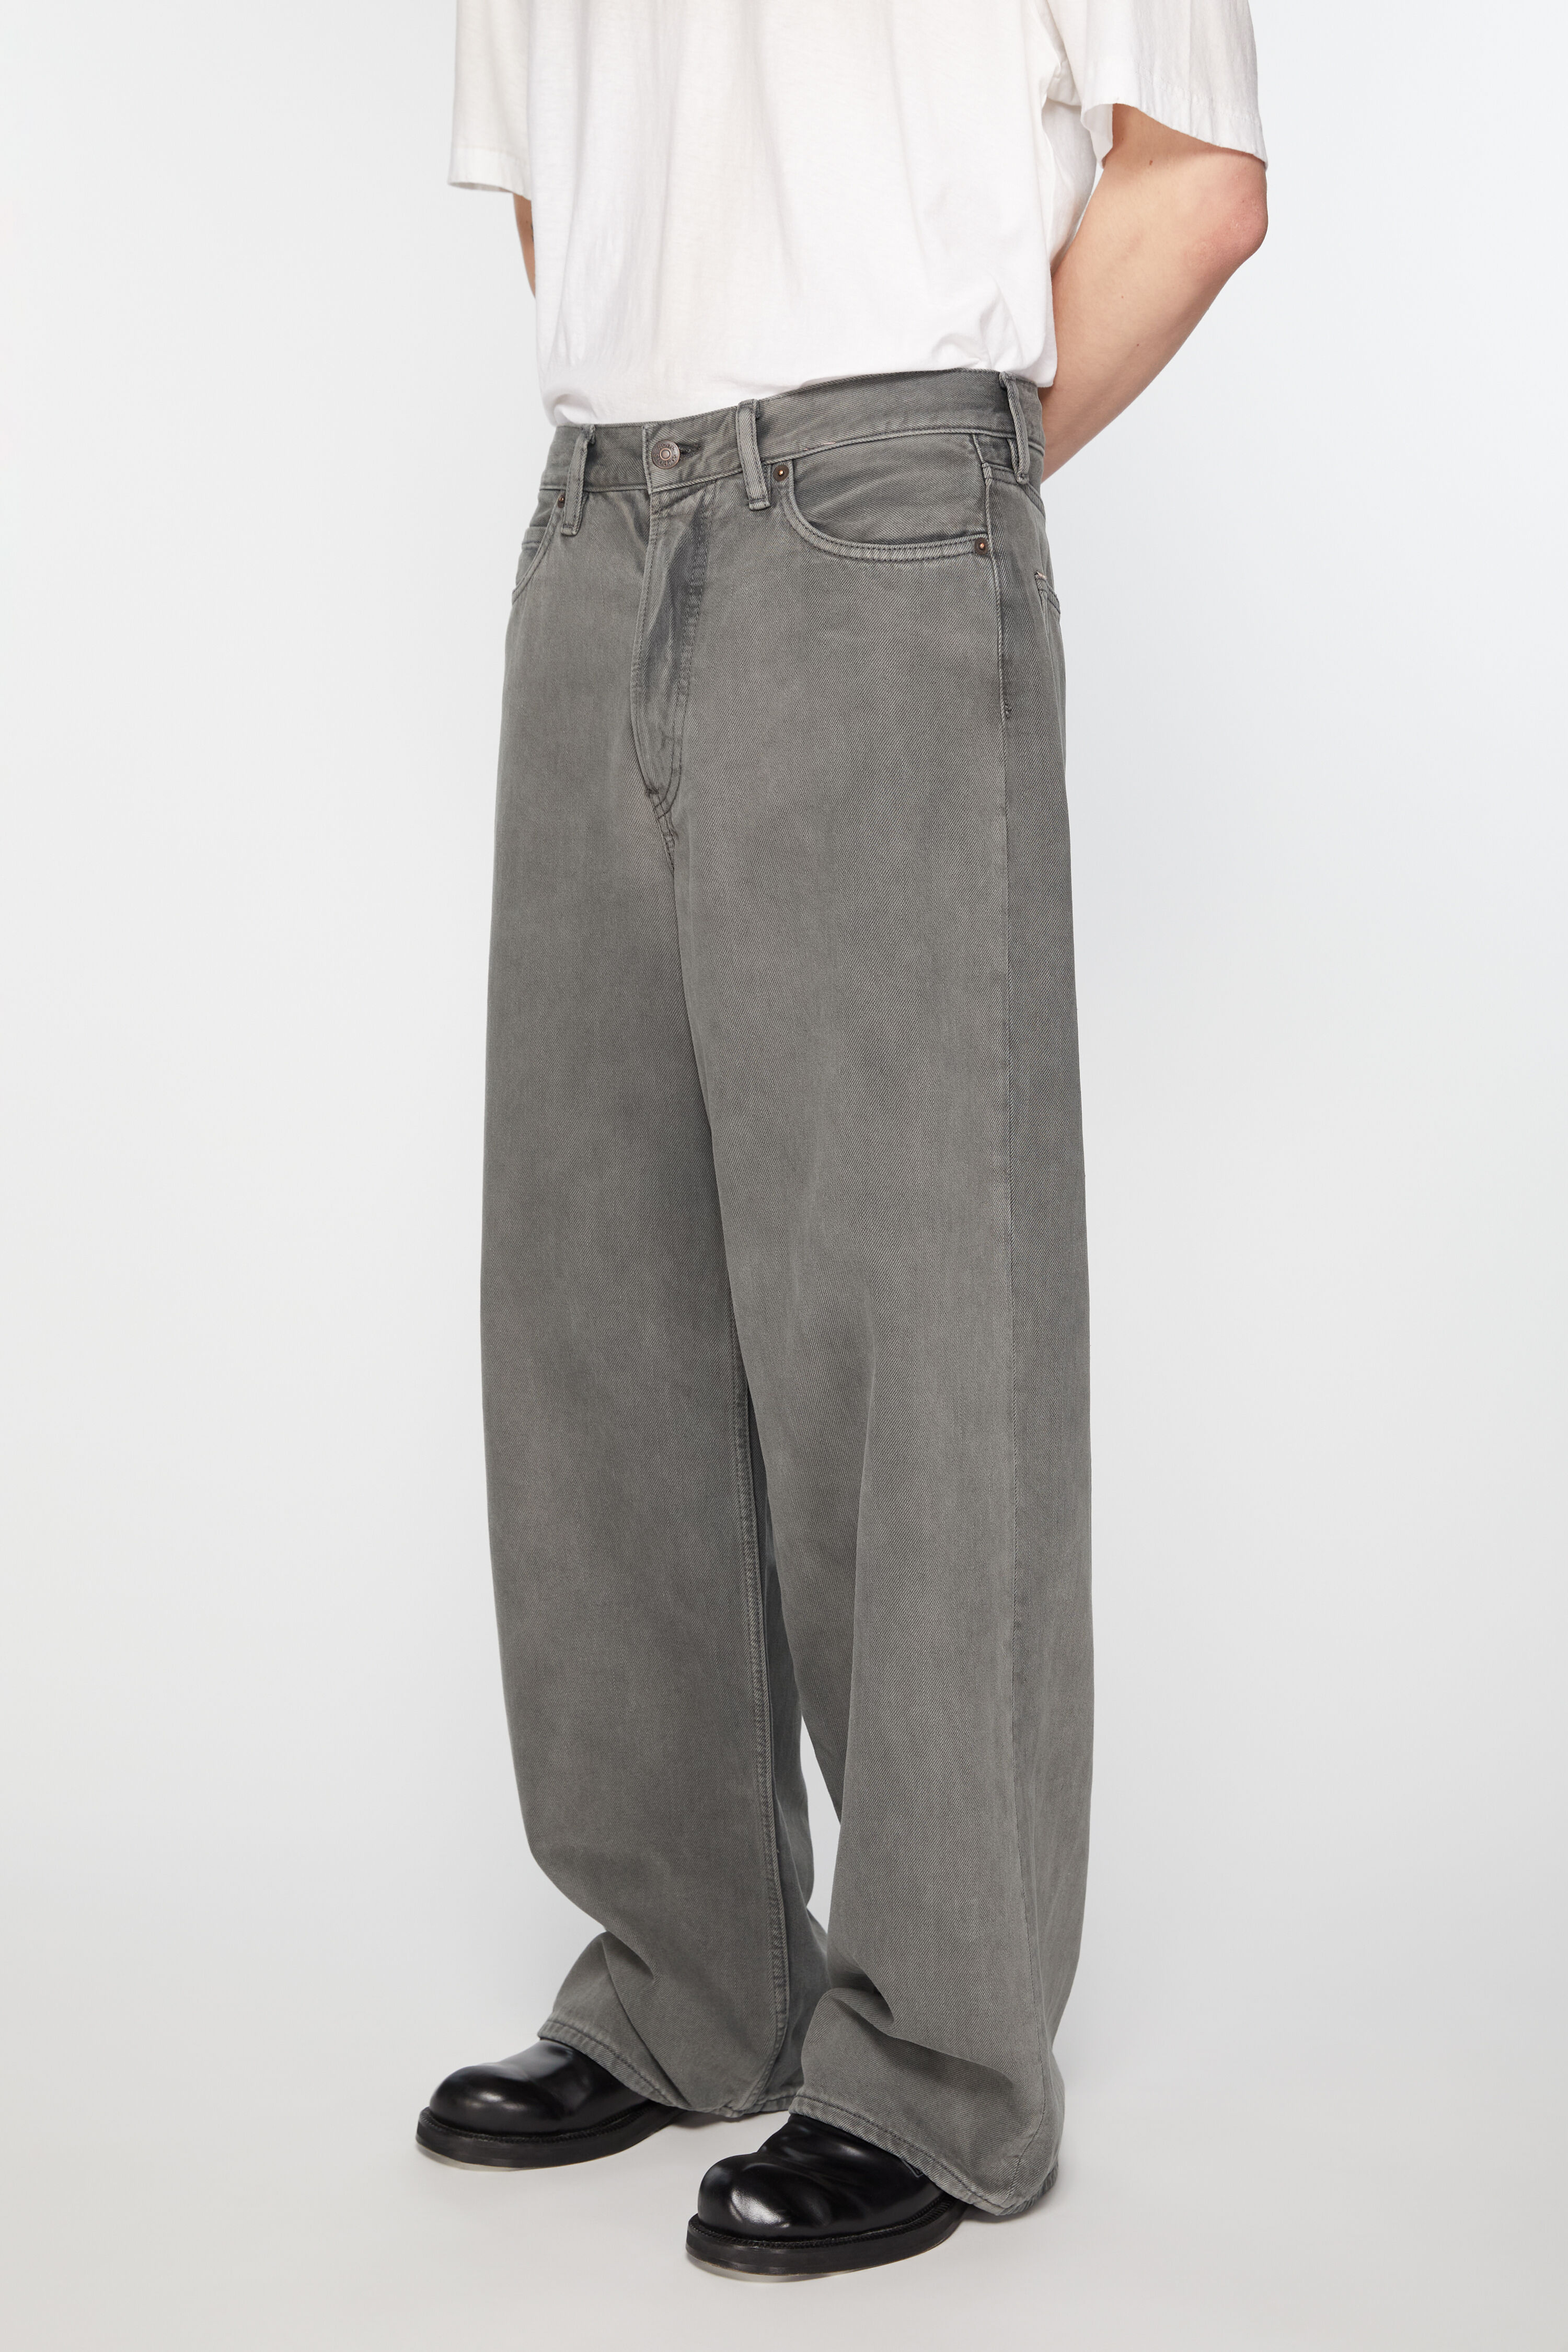 Acne Studios - Loose fit jeans - 1981M - Anthracite grey